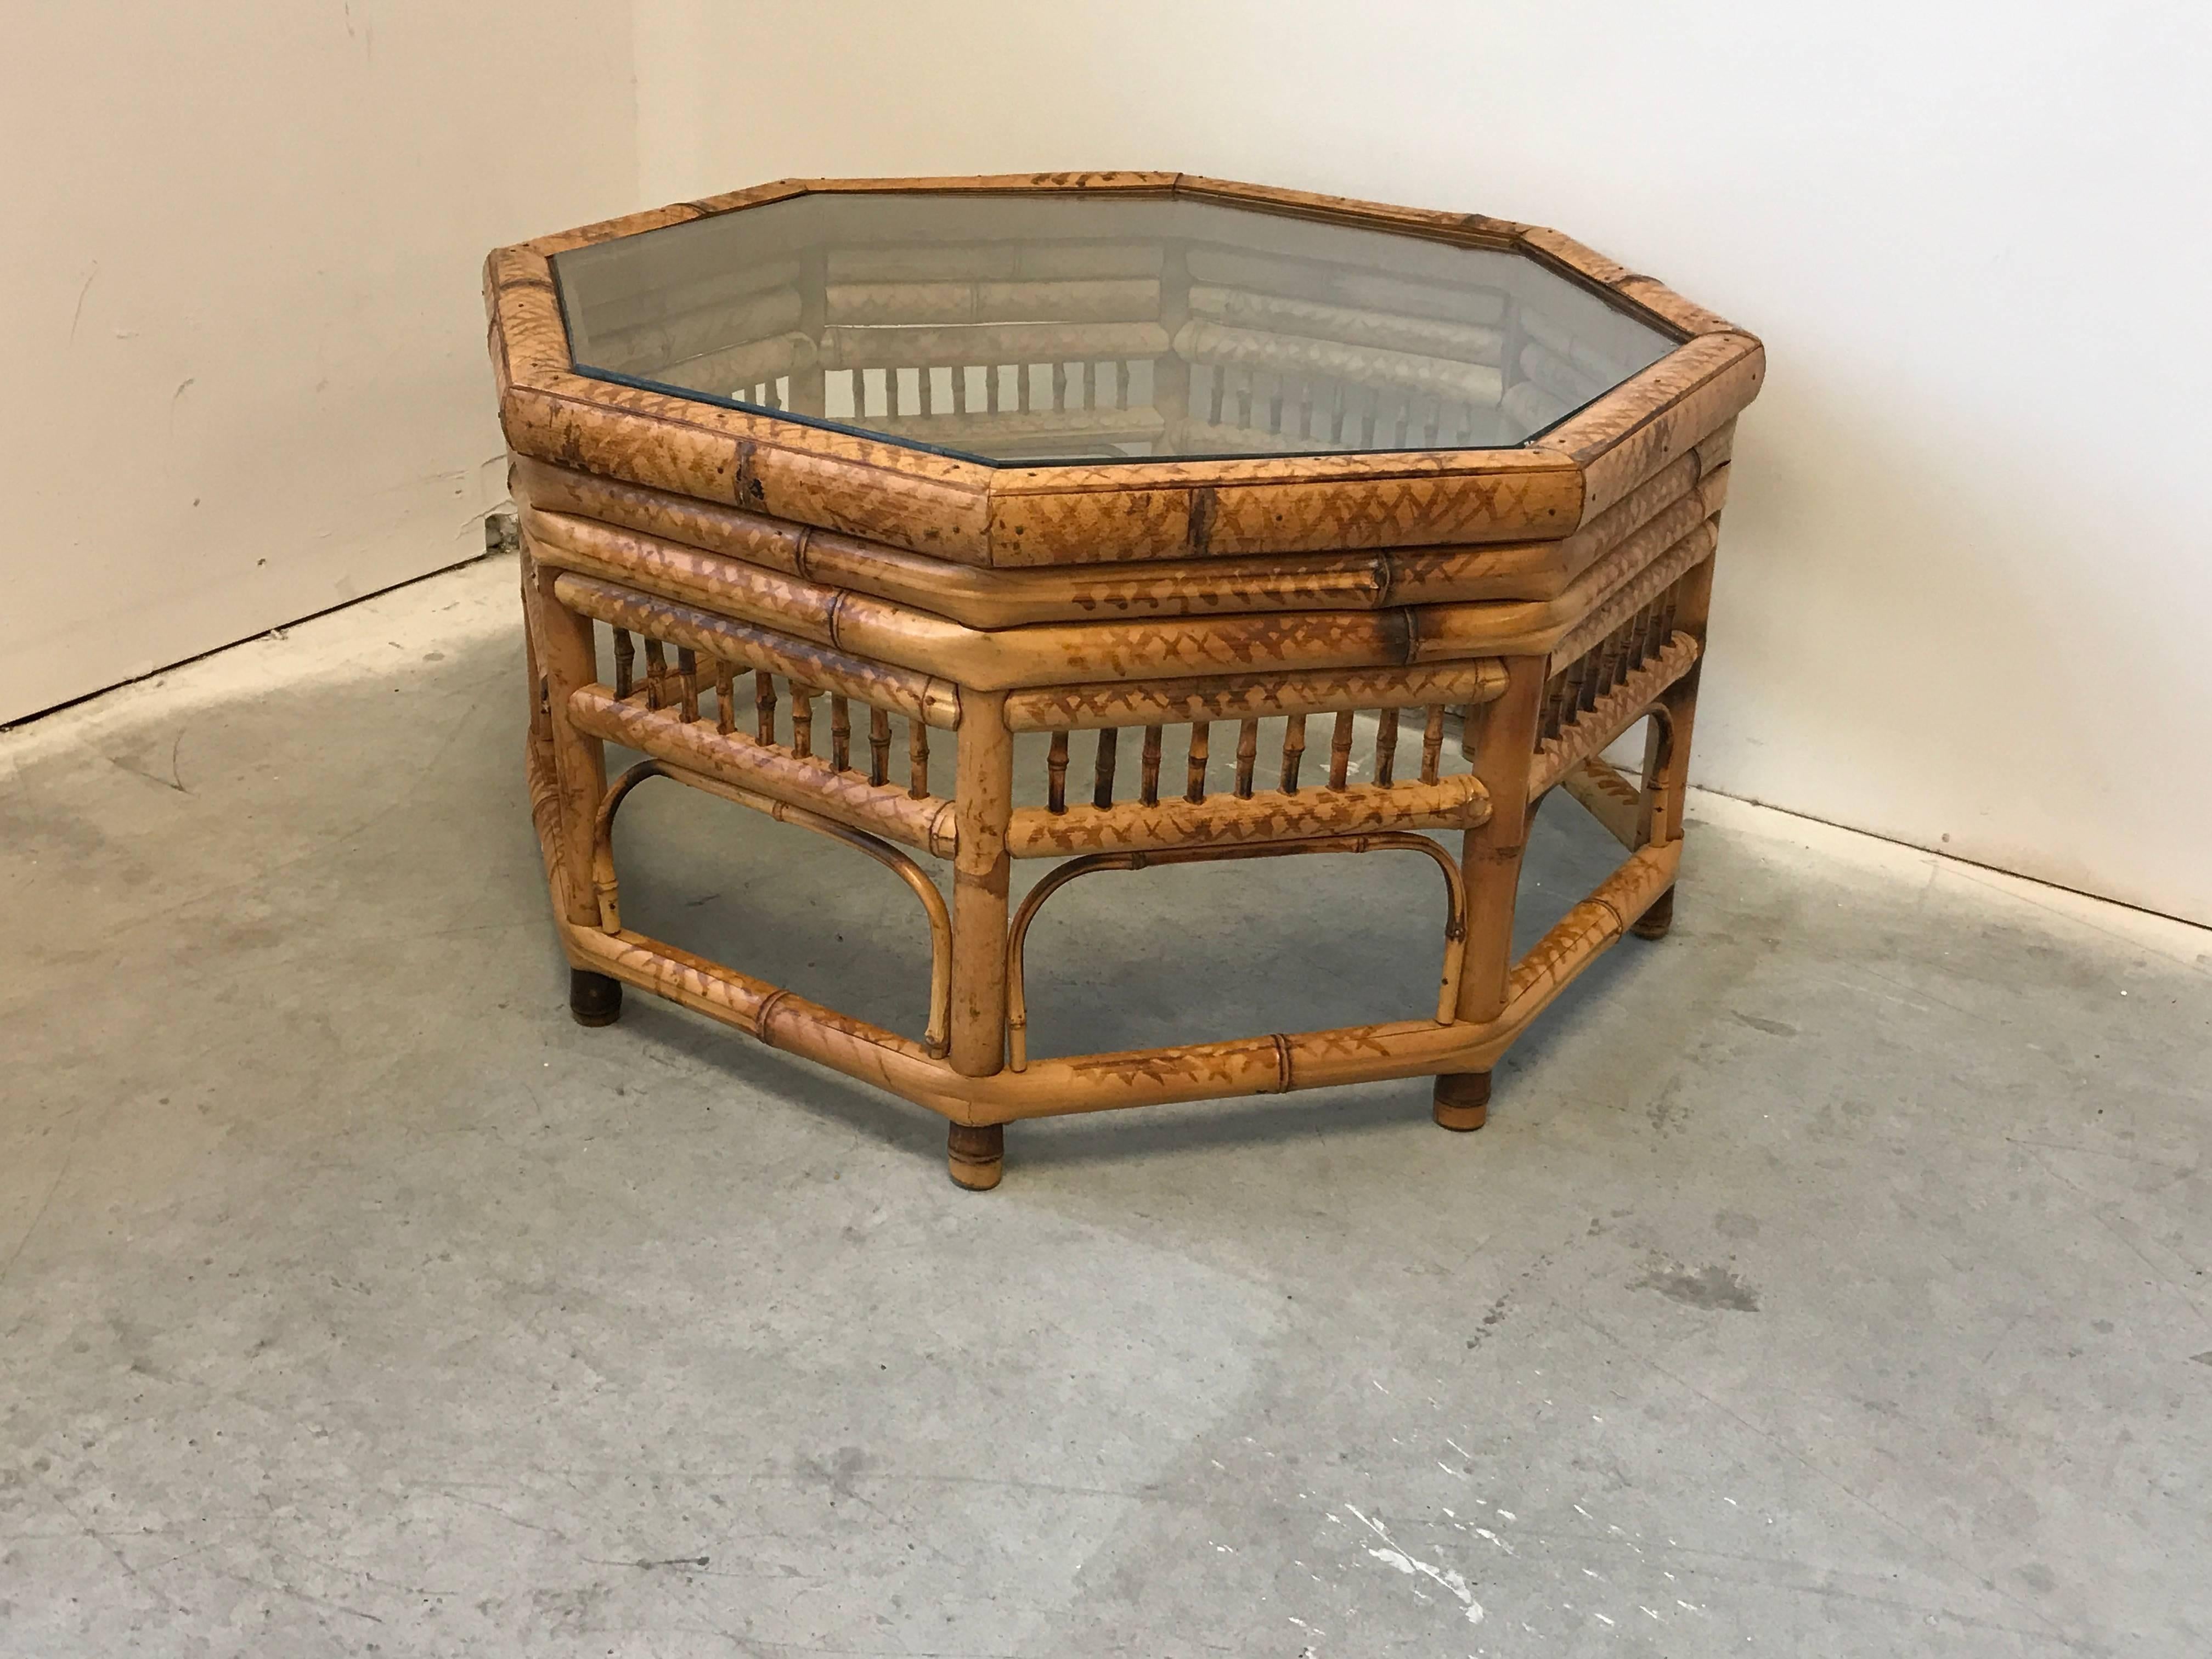 Offered is a gorgeous, 1960s Palm Beach style, bamboo coffee table with fitted glass top.